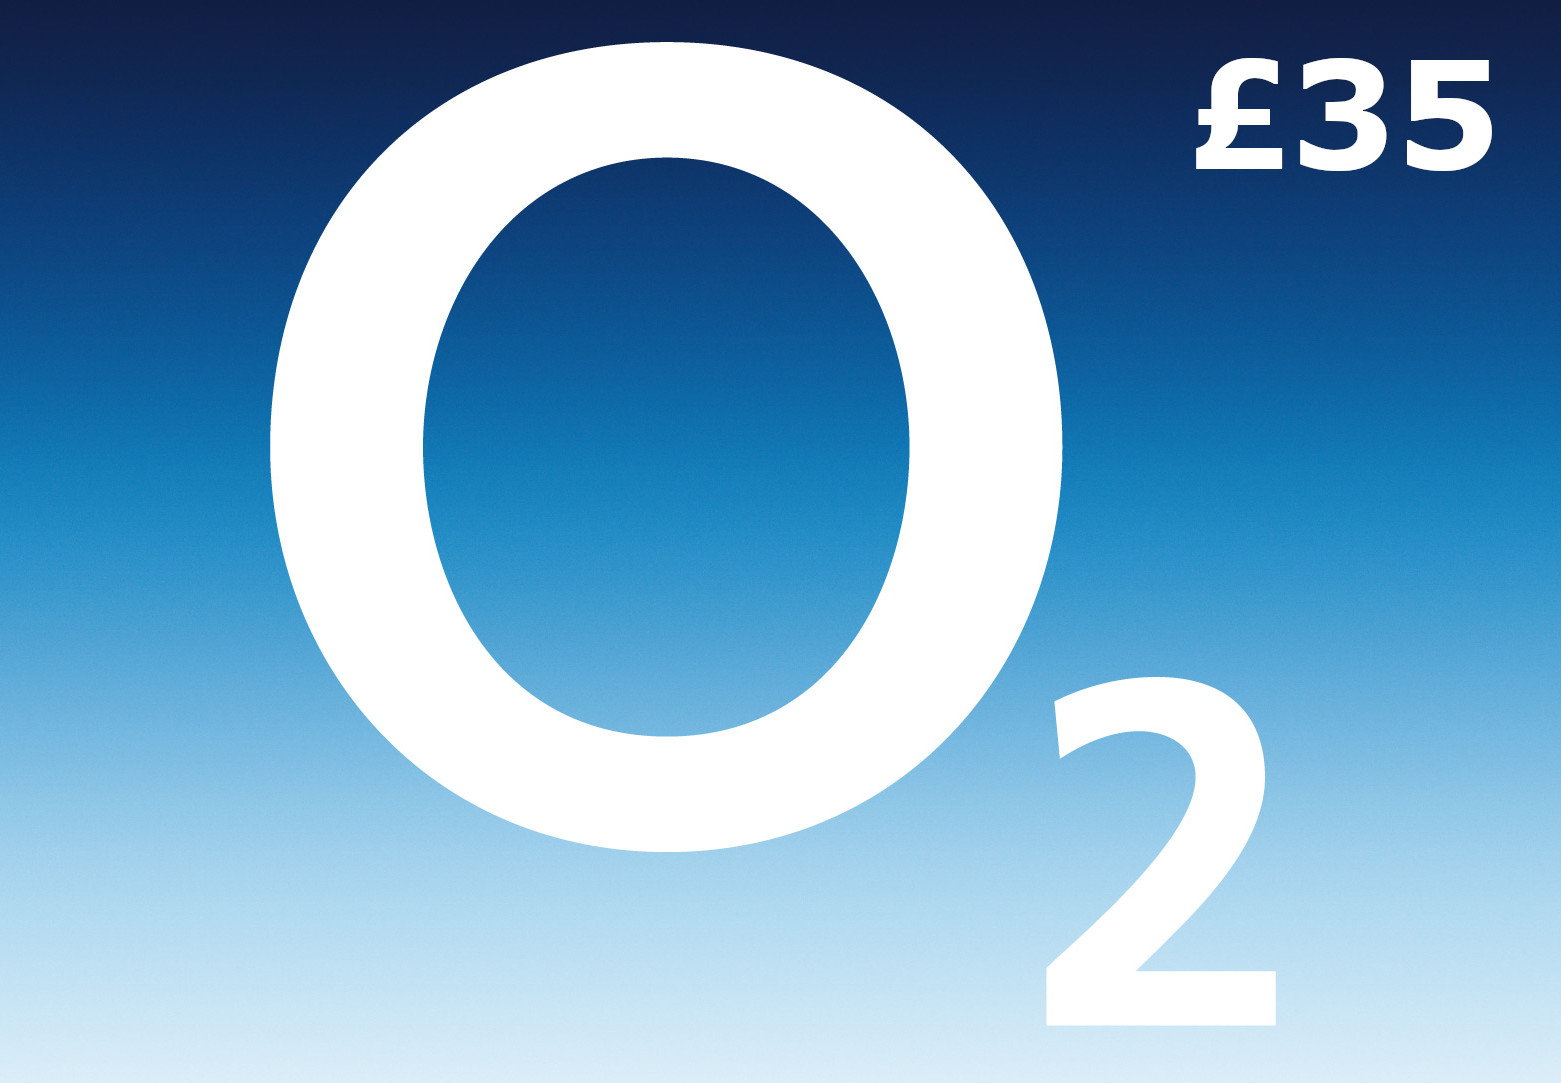 O2 £35 Mobile Top-up UK